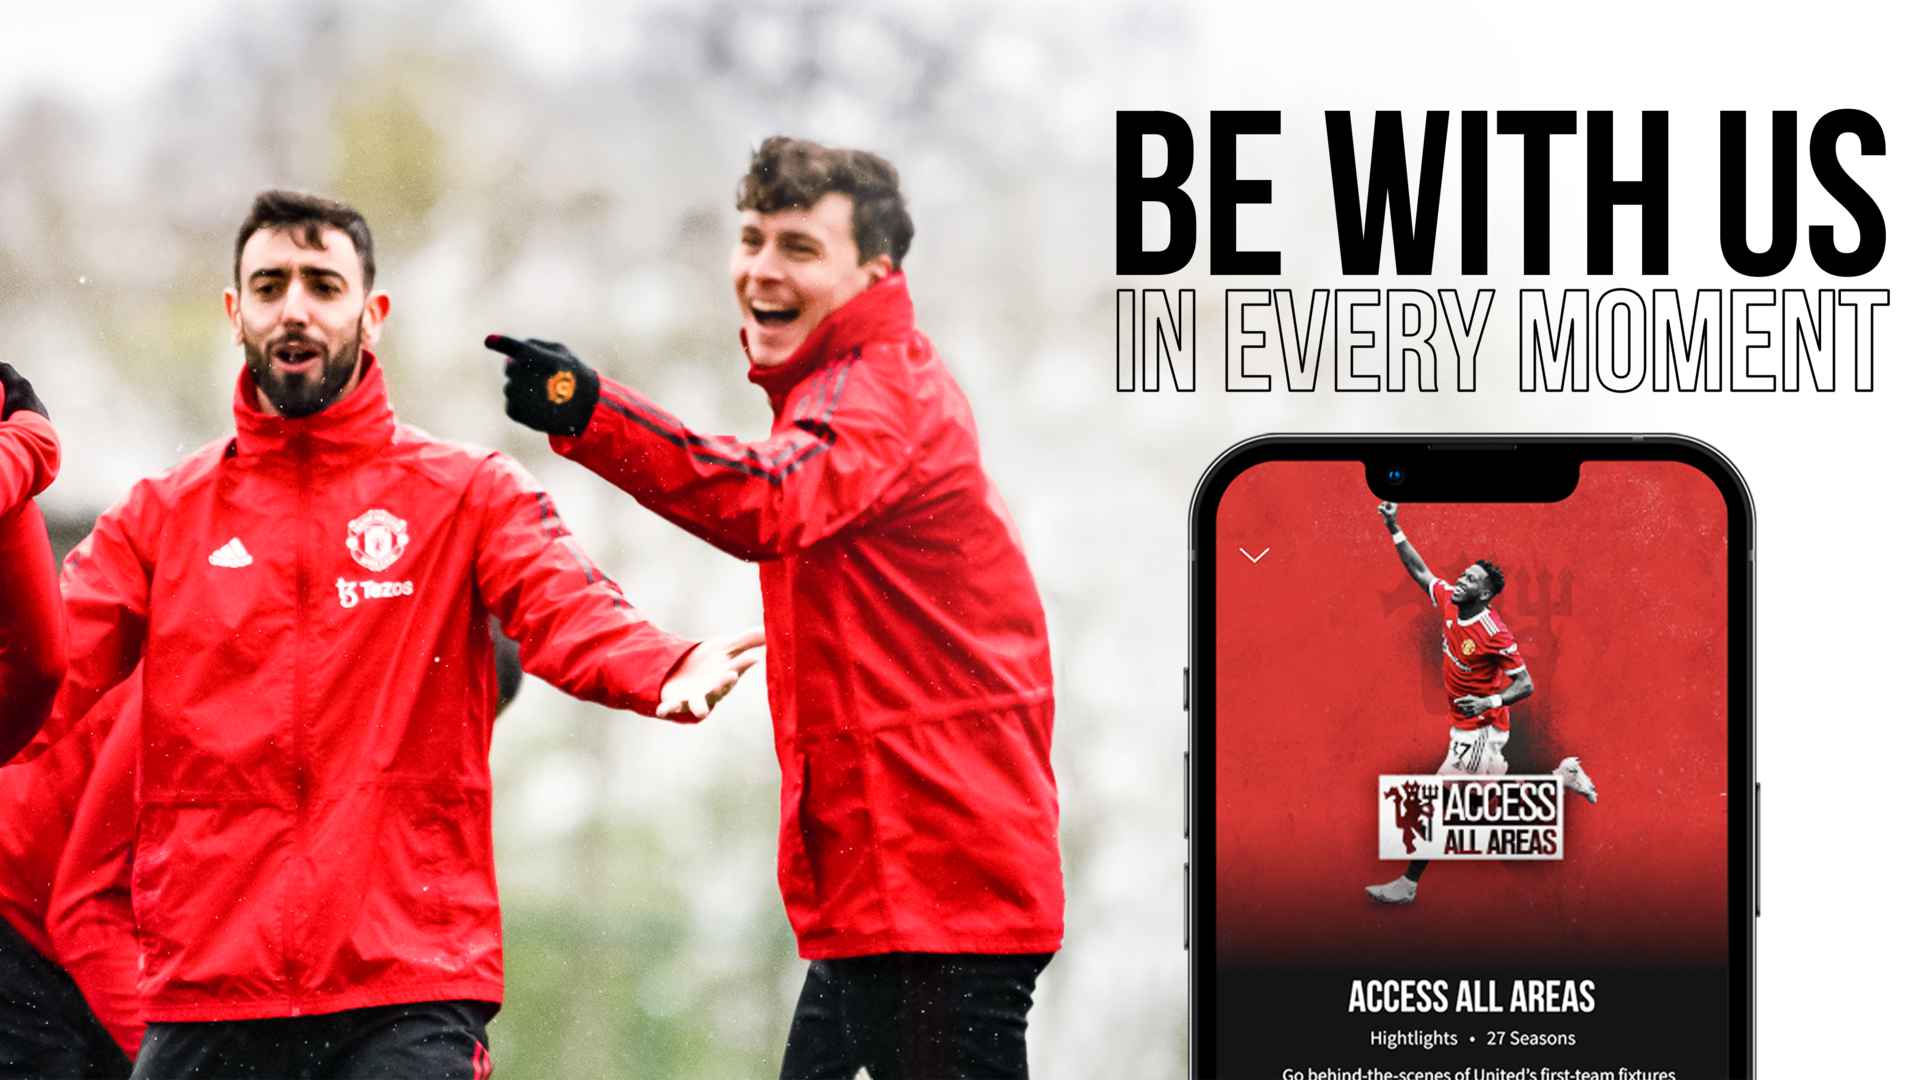  Introducing the new Manchester United App - now with MUTV